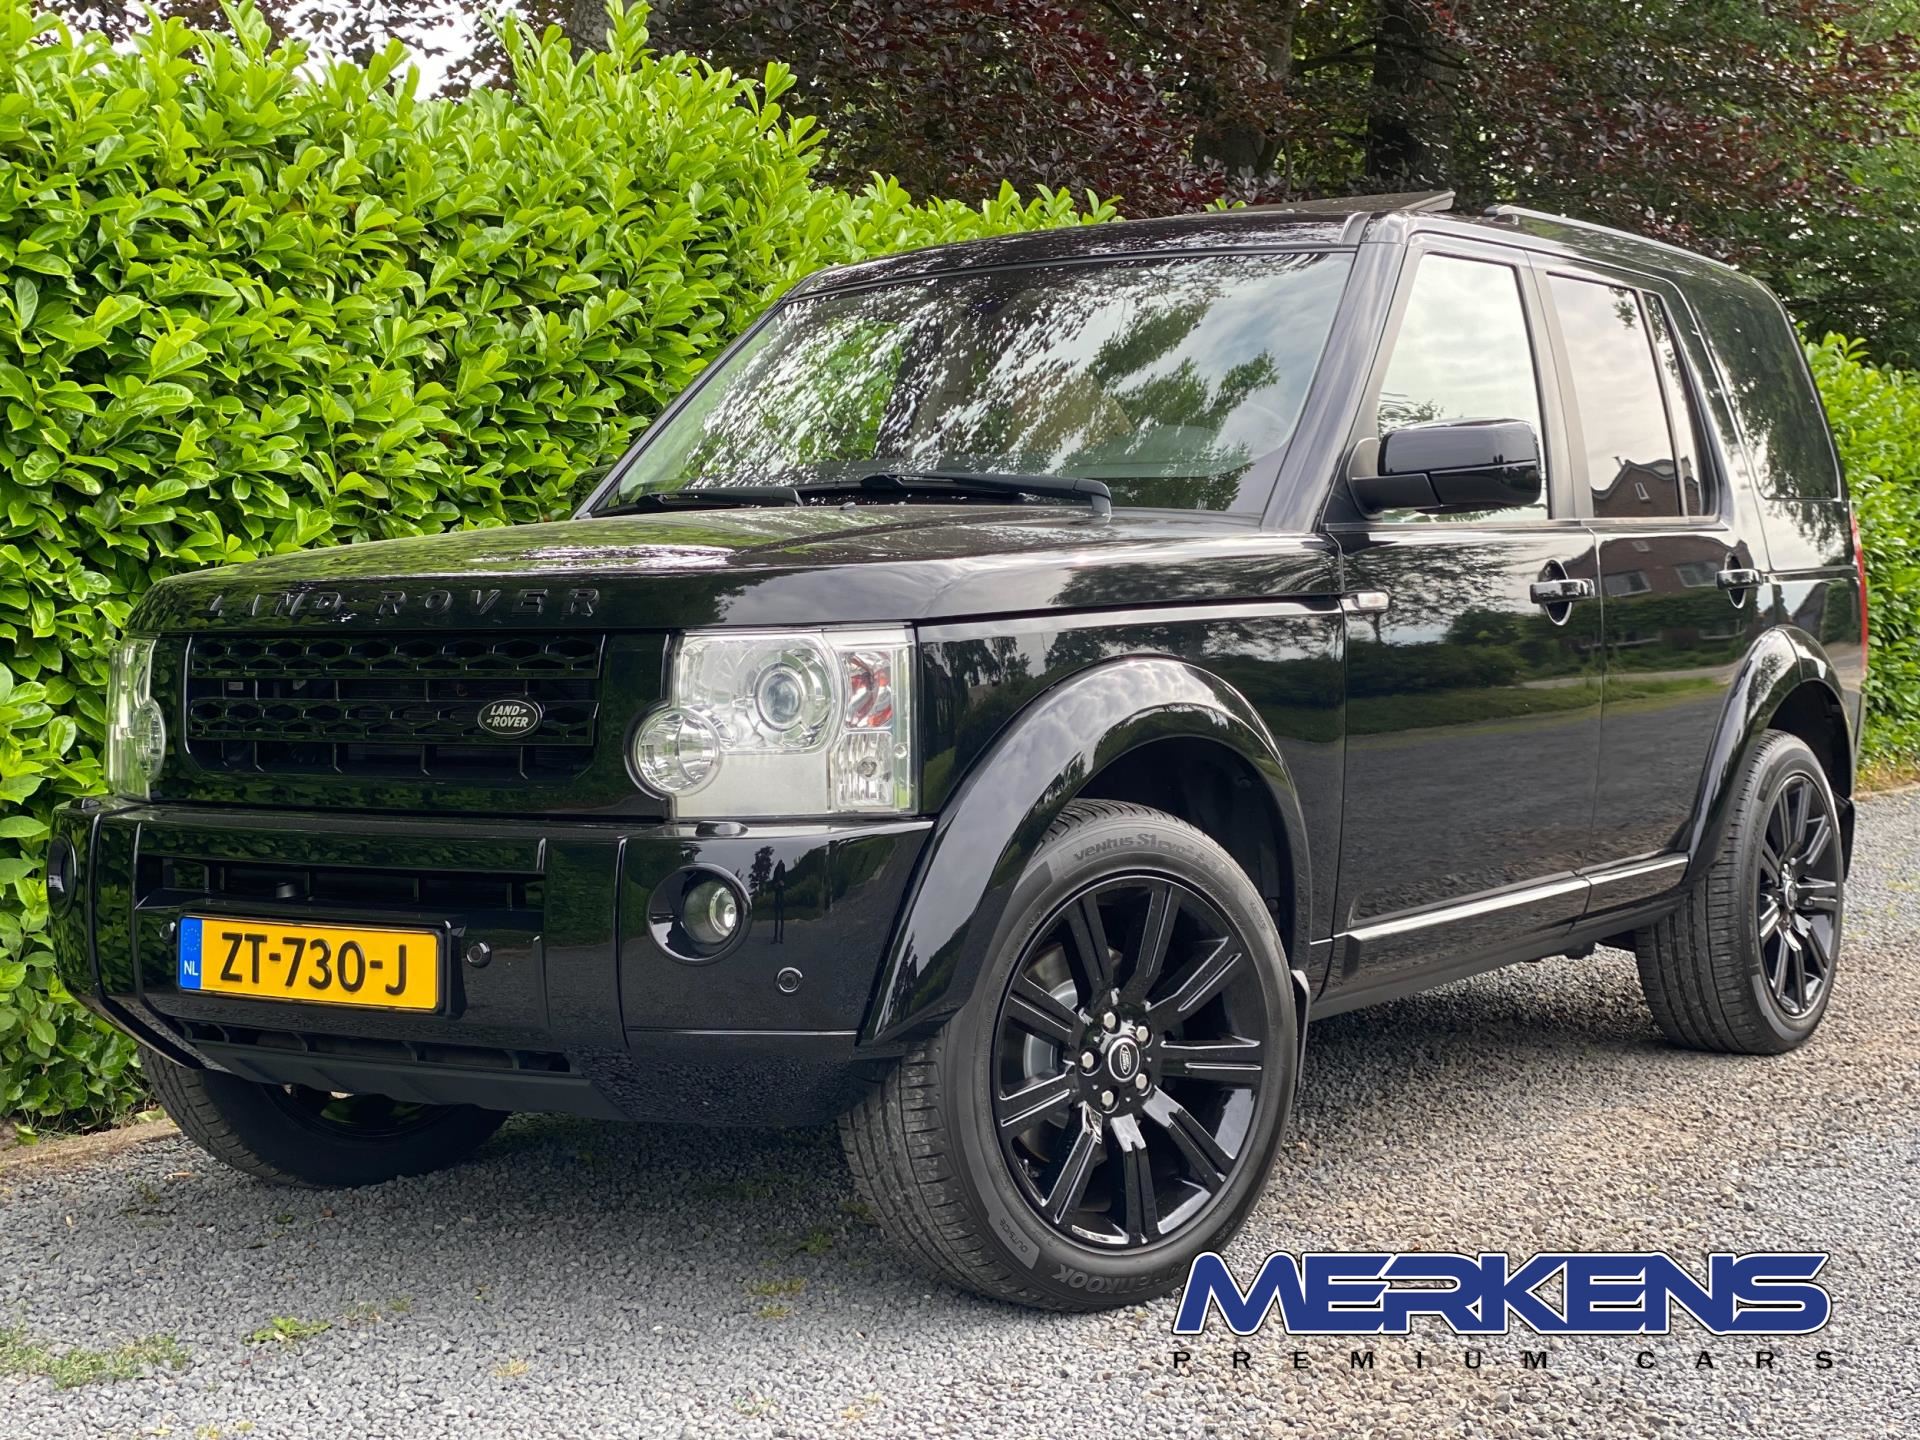 R bank Bacteriën Land Rover Discovery - 4.4 V8 HSE Youngtimer 7 Pers Black Edition Benzine  uit 2005 - www.merkenspremiumcars.nl